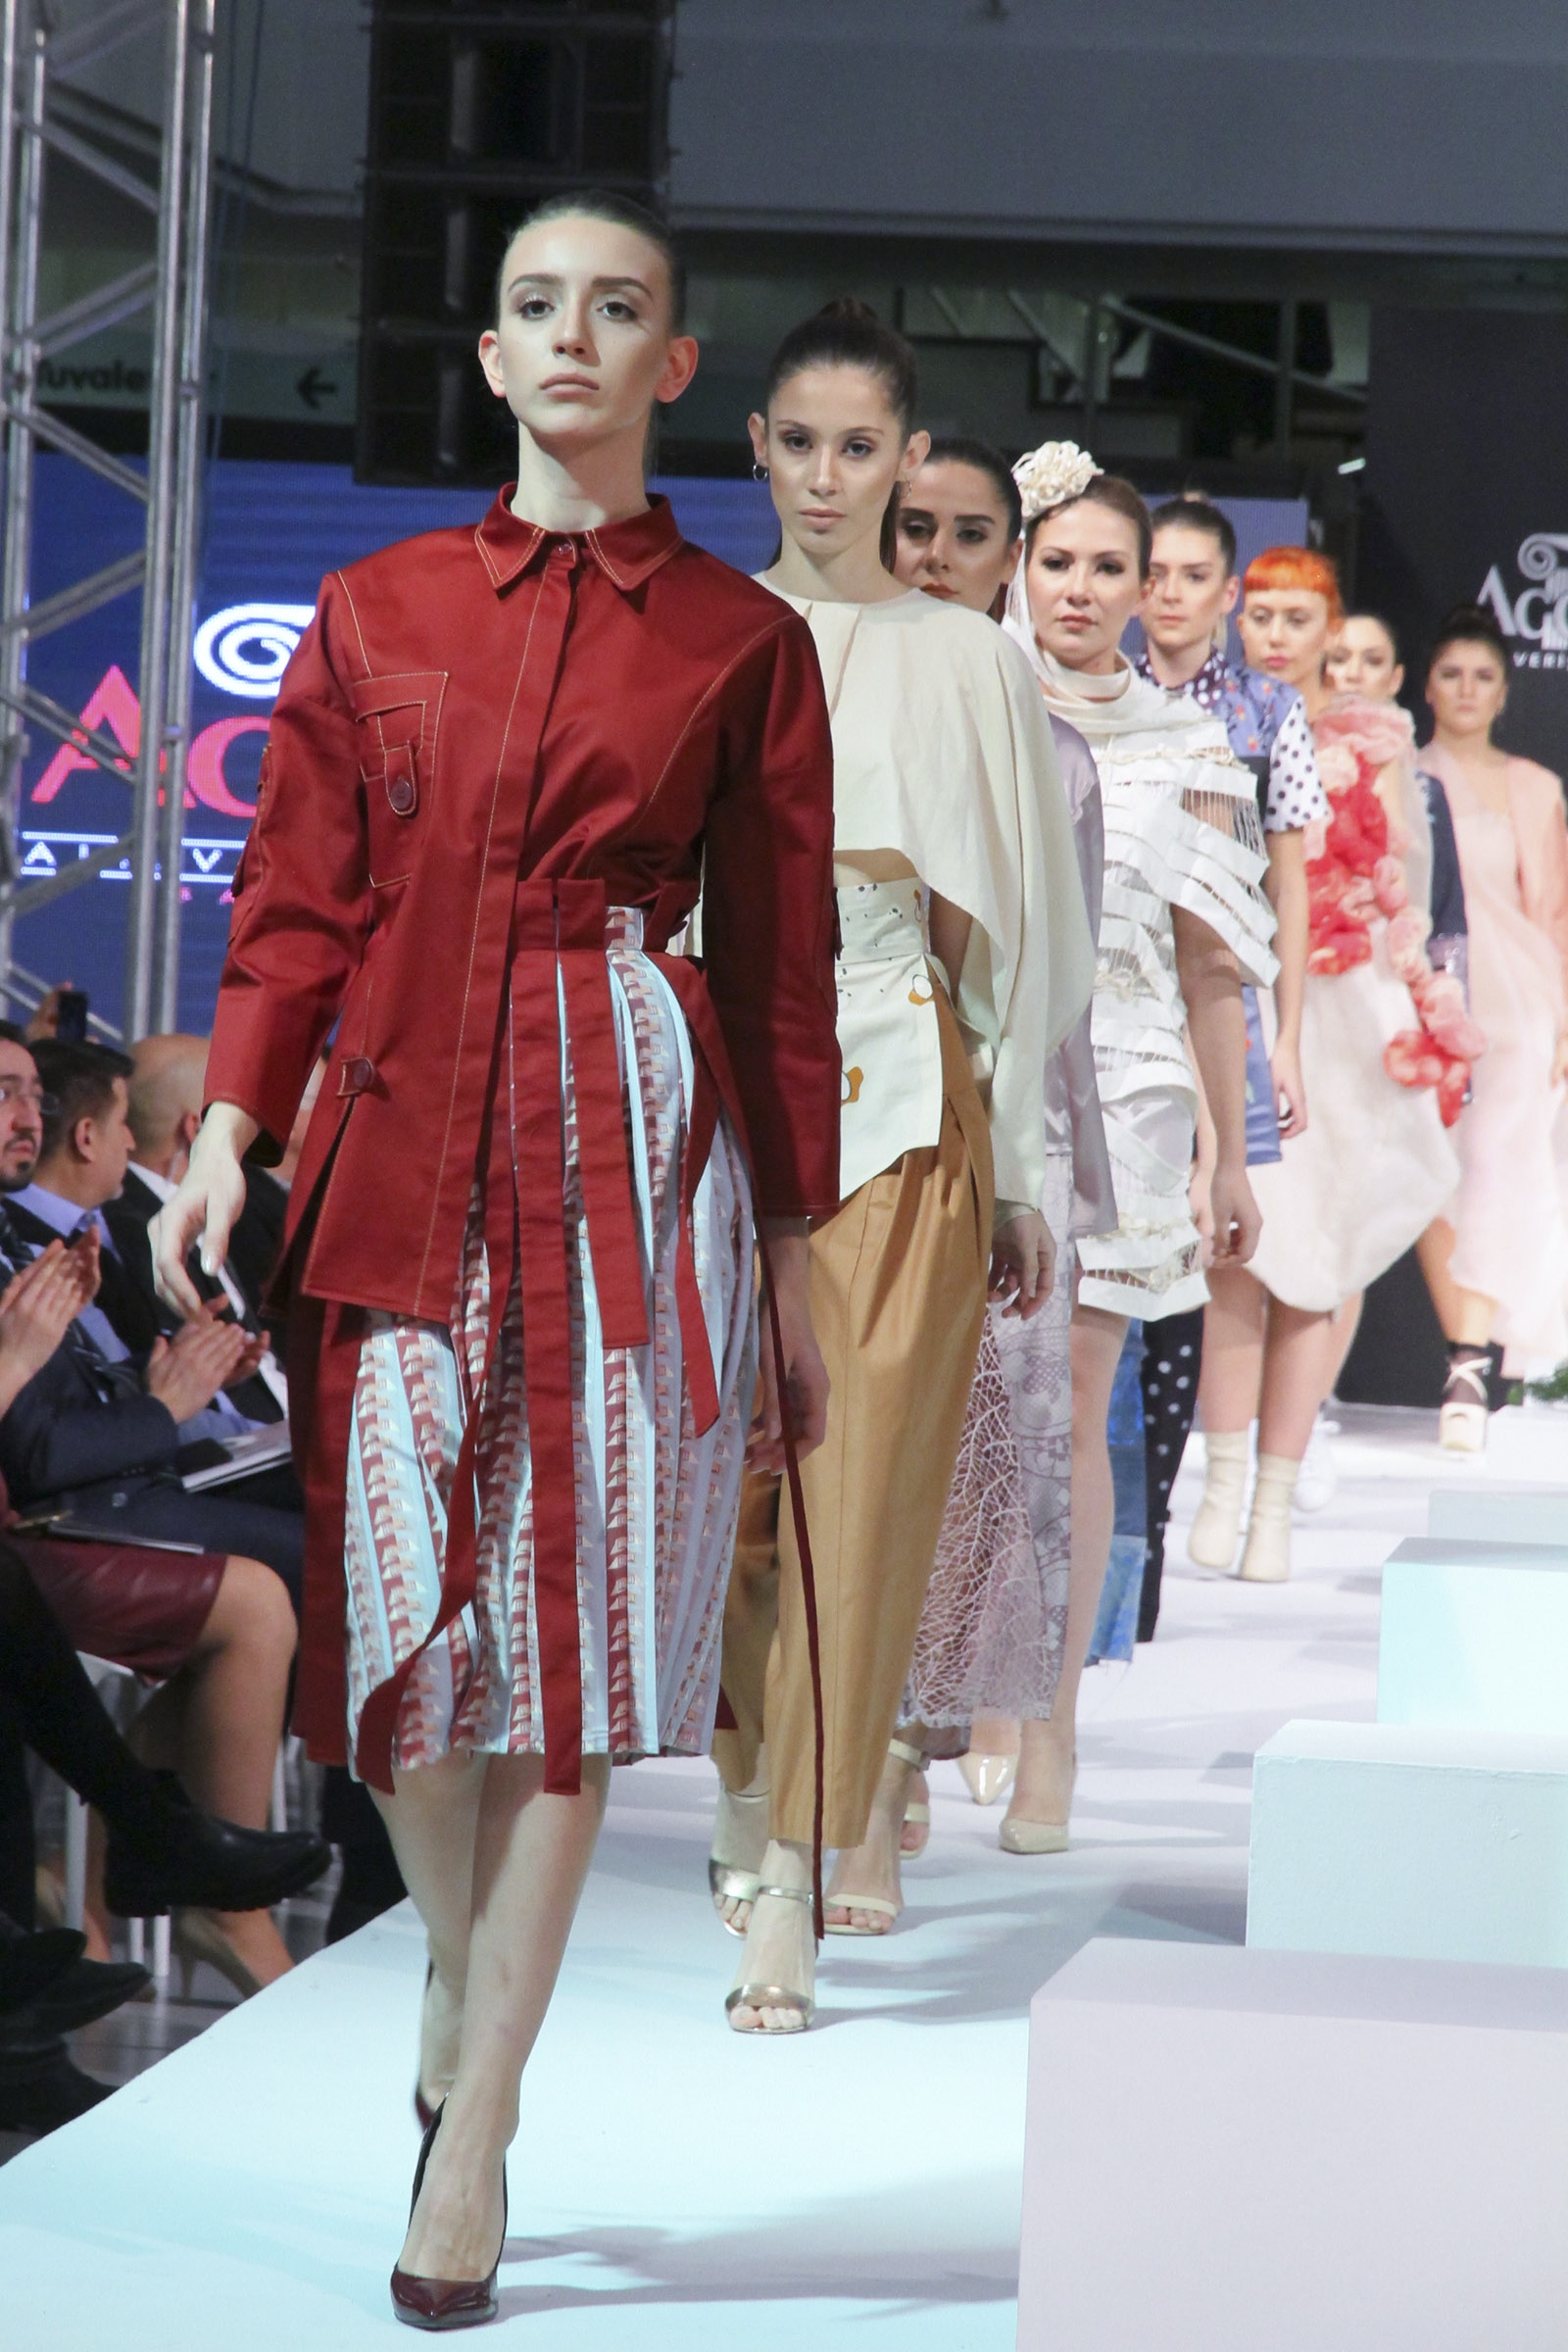 WIND OF ‘NEW ROMANTICISM’ ON THE RUNWAY 